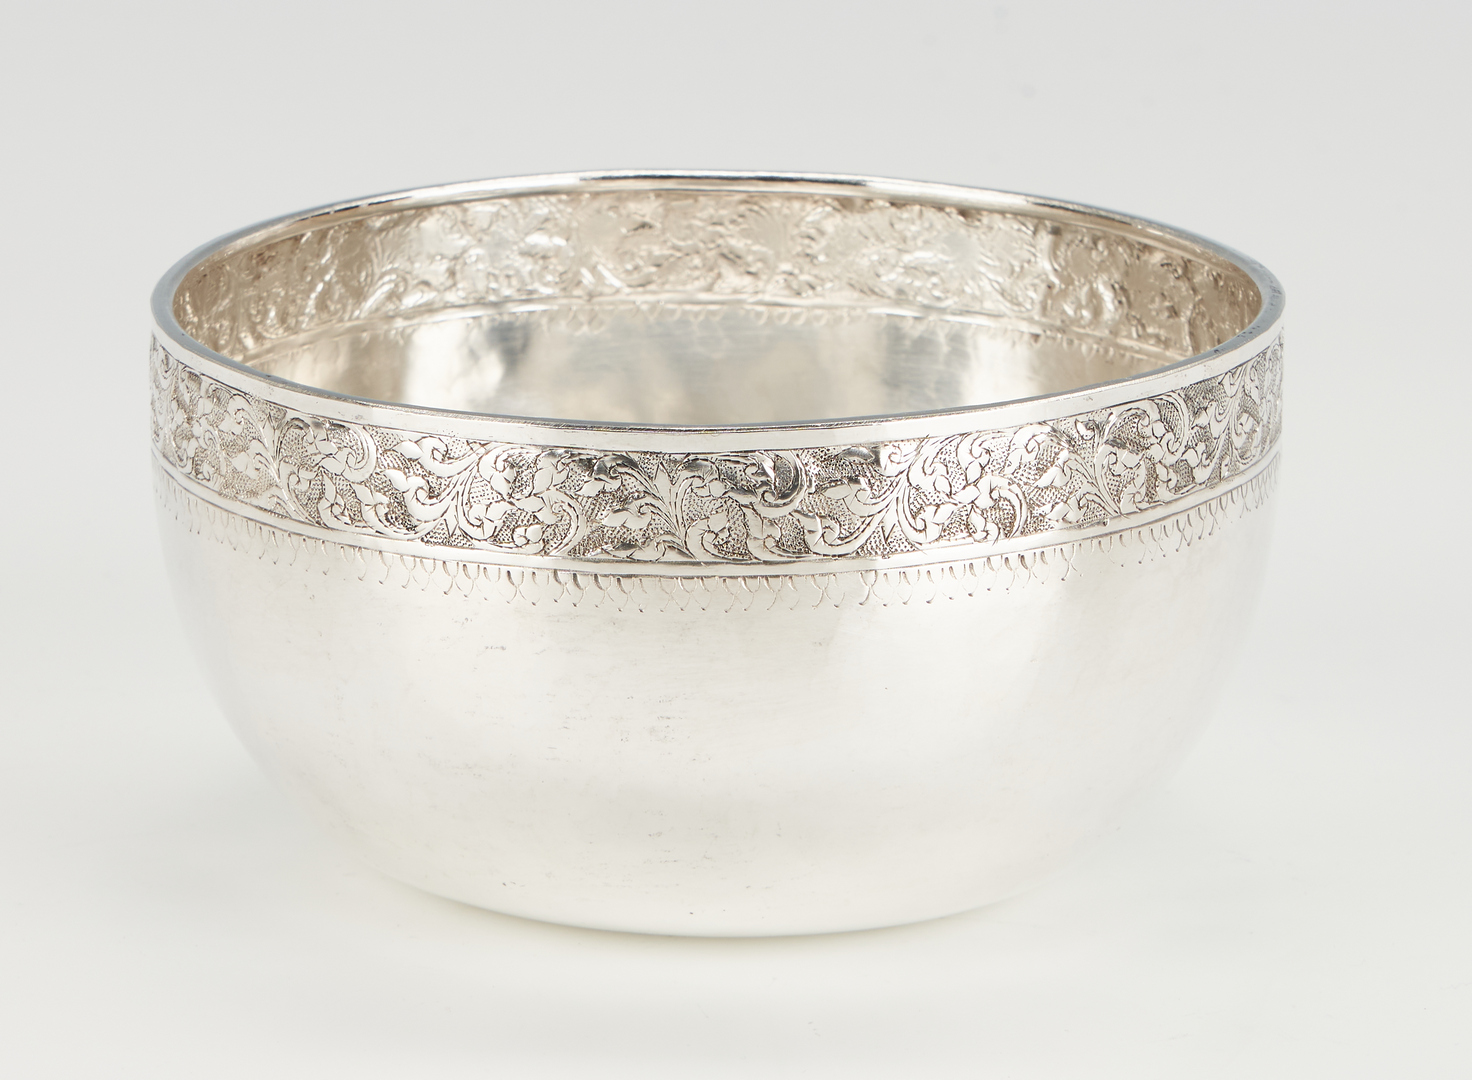 Lot 2: Asian Silver Trophy, Ladle and Bowl